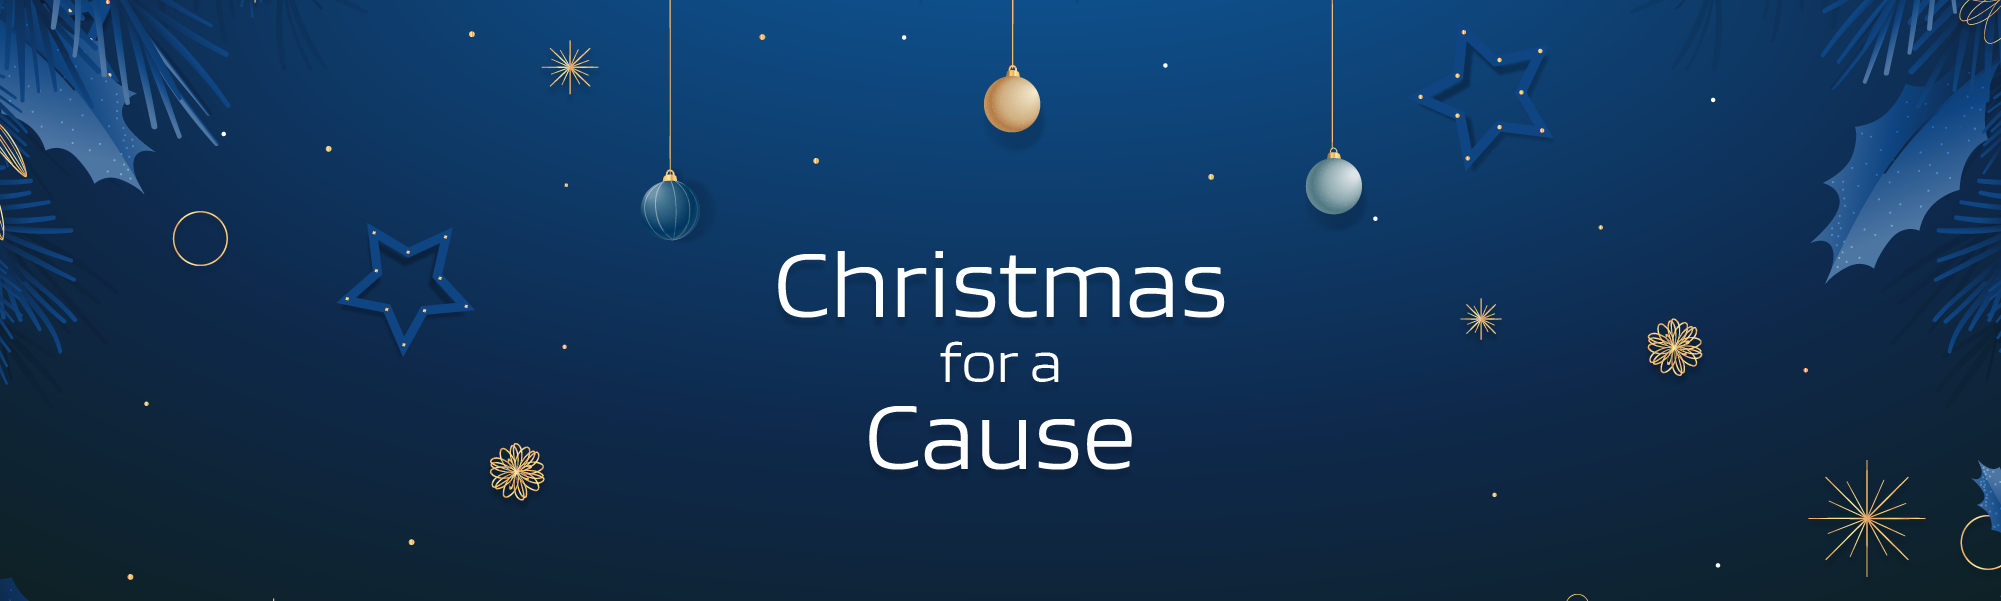 Christmas for a Cause 2020